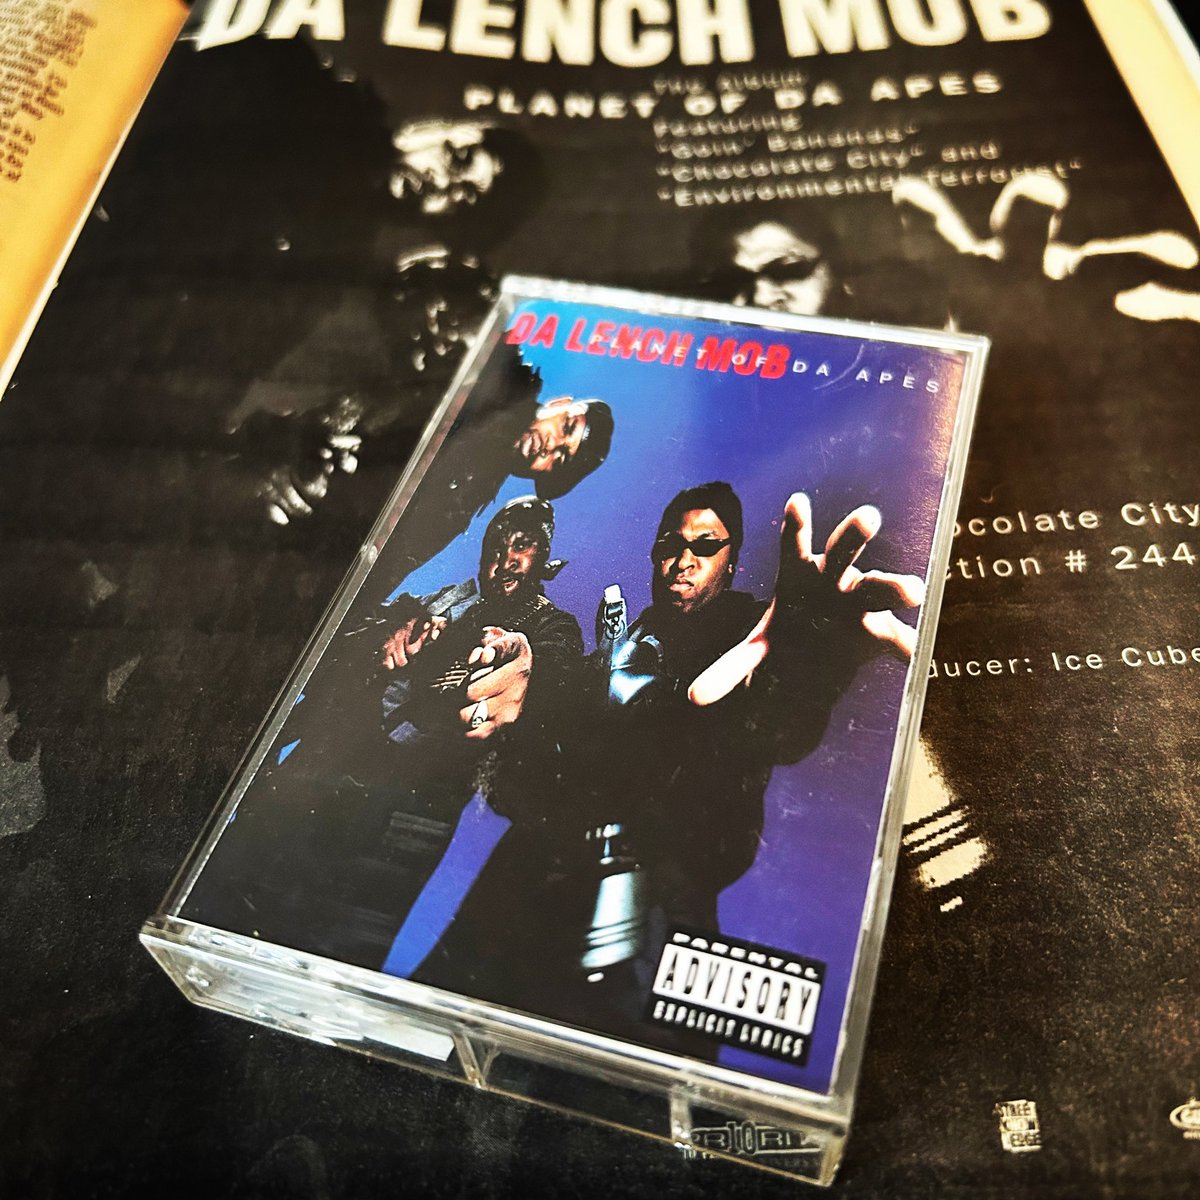 Da Lench Mob
Planet Of Da Apes
#chocolatecity #cutthroats #kingofthejungle #planetofdaapes #goinbananas #mellowmadness #environmentalterrorist #settheshitstraight #trapped #finalcall #hiphop #classic #ripshorty #forever #celebrated #priority #records #dalenchmob #hiphopgods